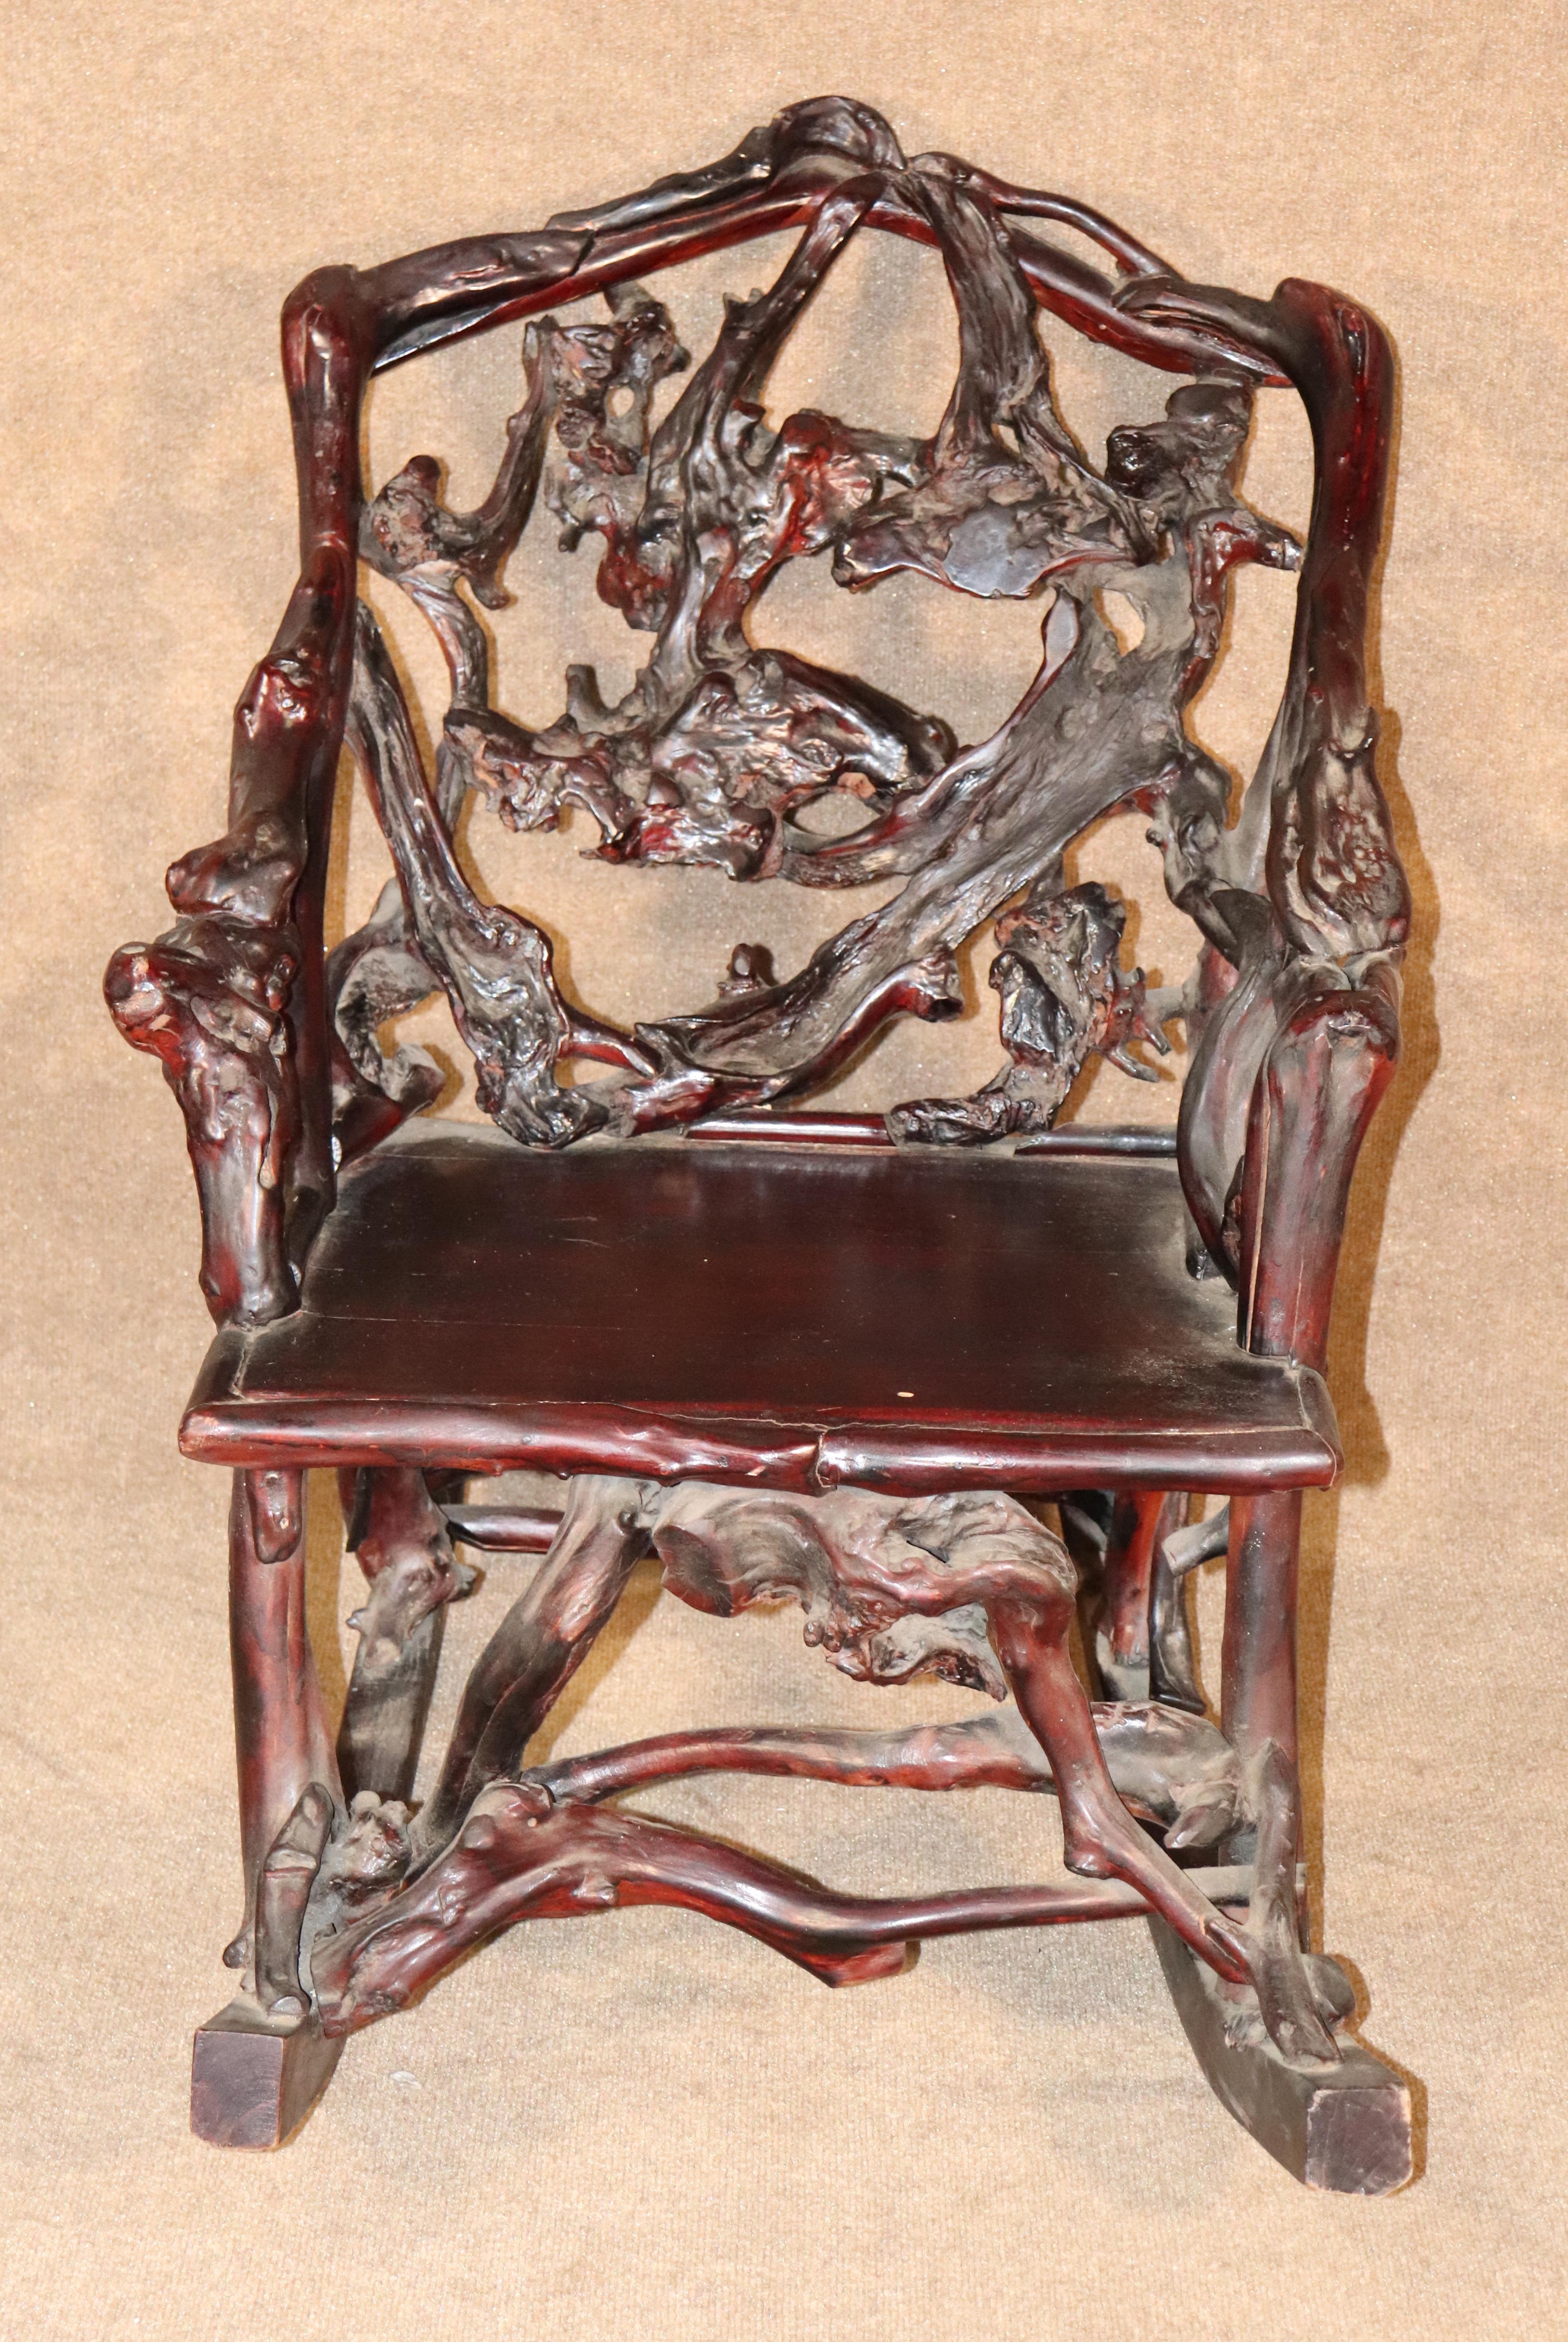 Japanese style rocking chair made of carved fruitwood. Artistic chair for home or office.
Please confirm location.